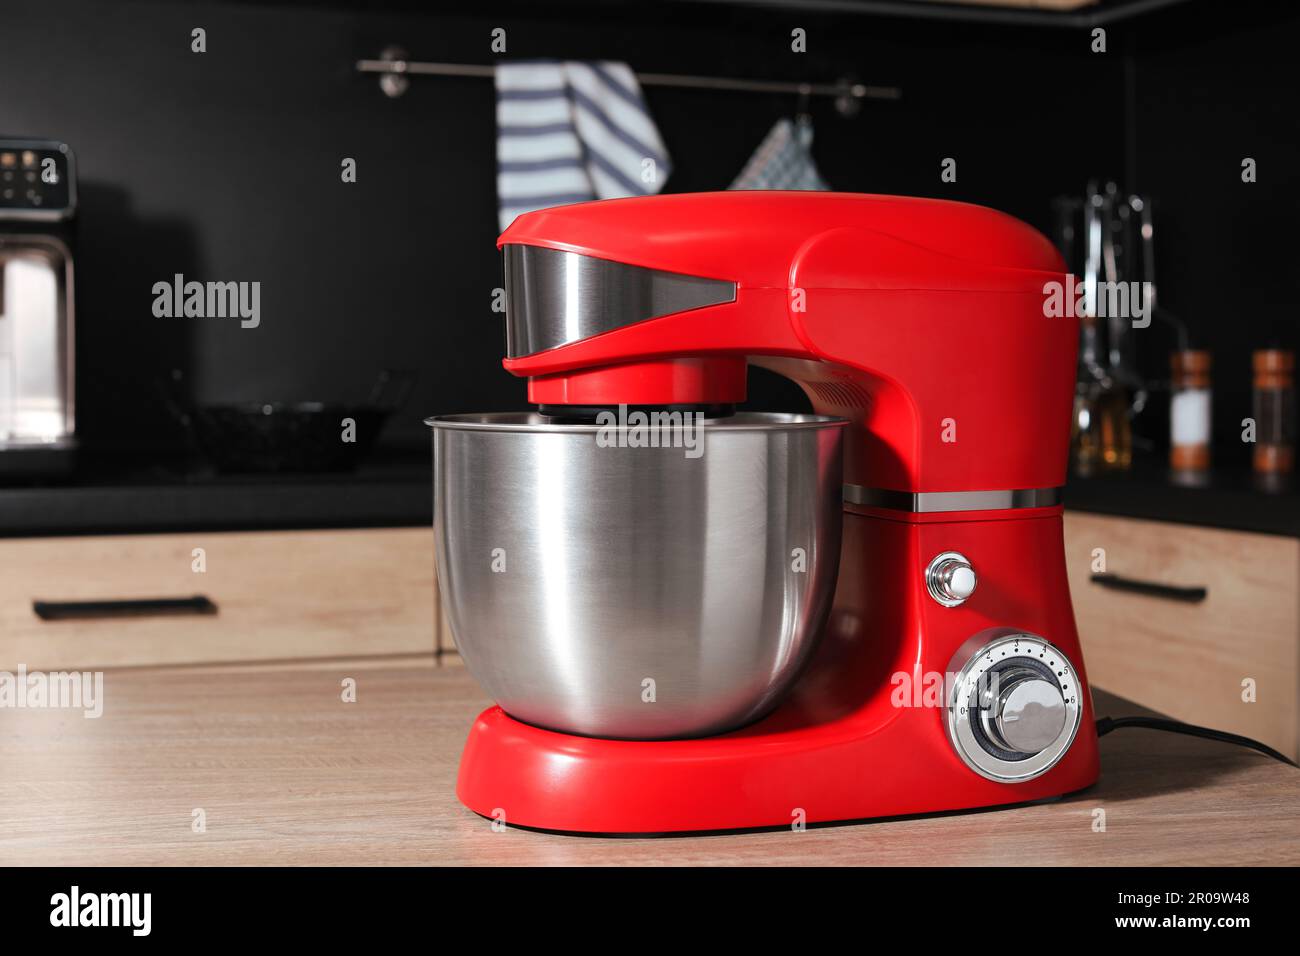 https://c8.alamy.com/comp/2R09W48/modern-stand-mixer-on-wooden-table-in-kitchen-2R09W48.jpg